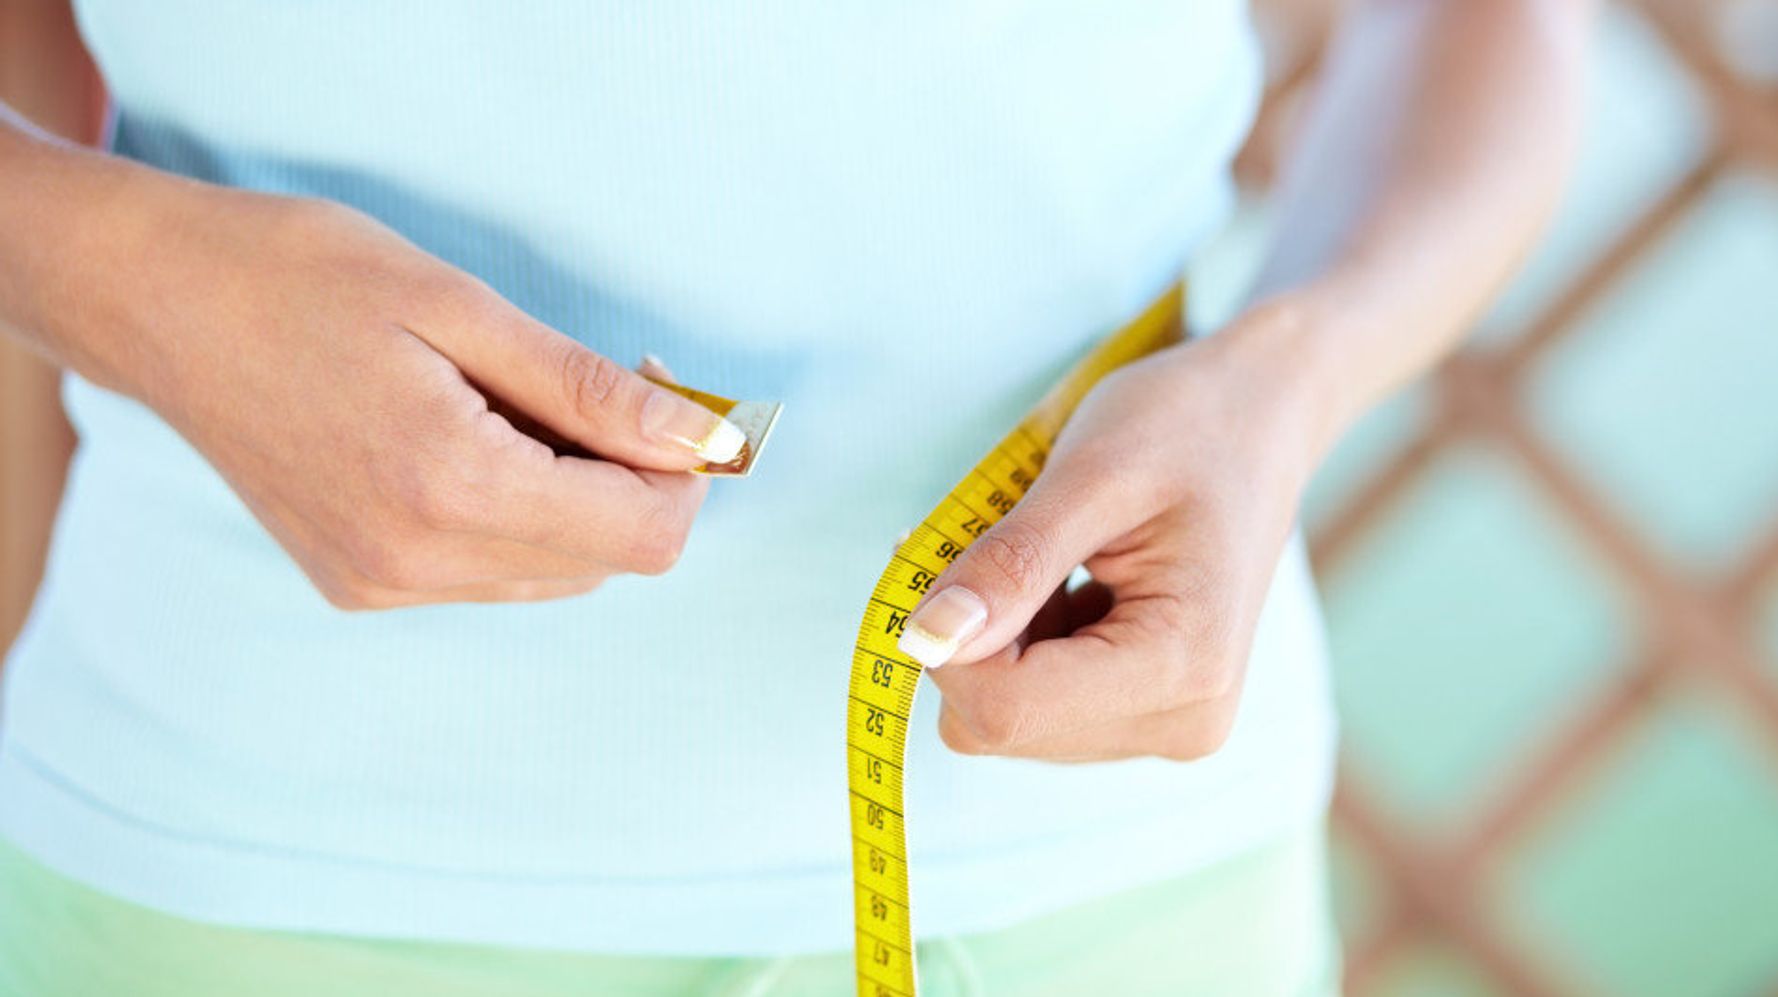 8 Things No One Tells You About Losing Weight HuffPost Communities